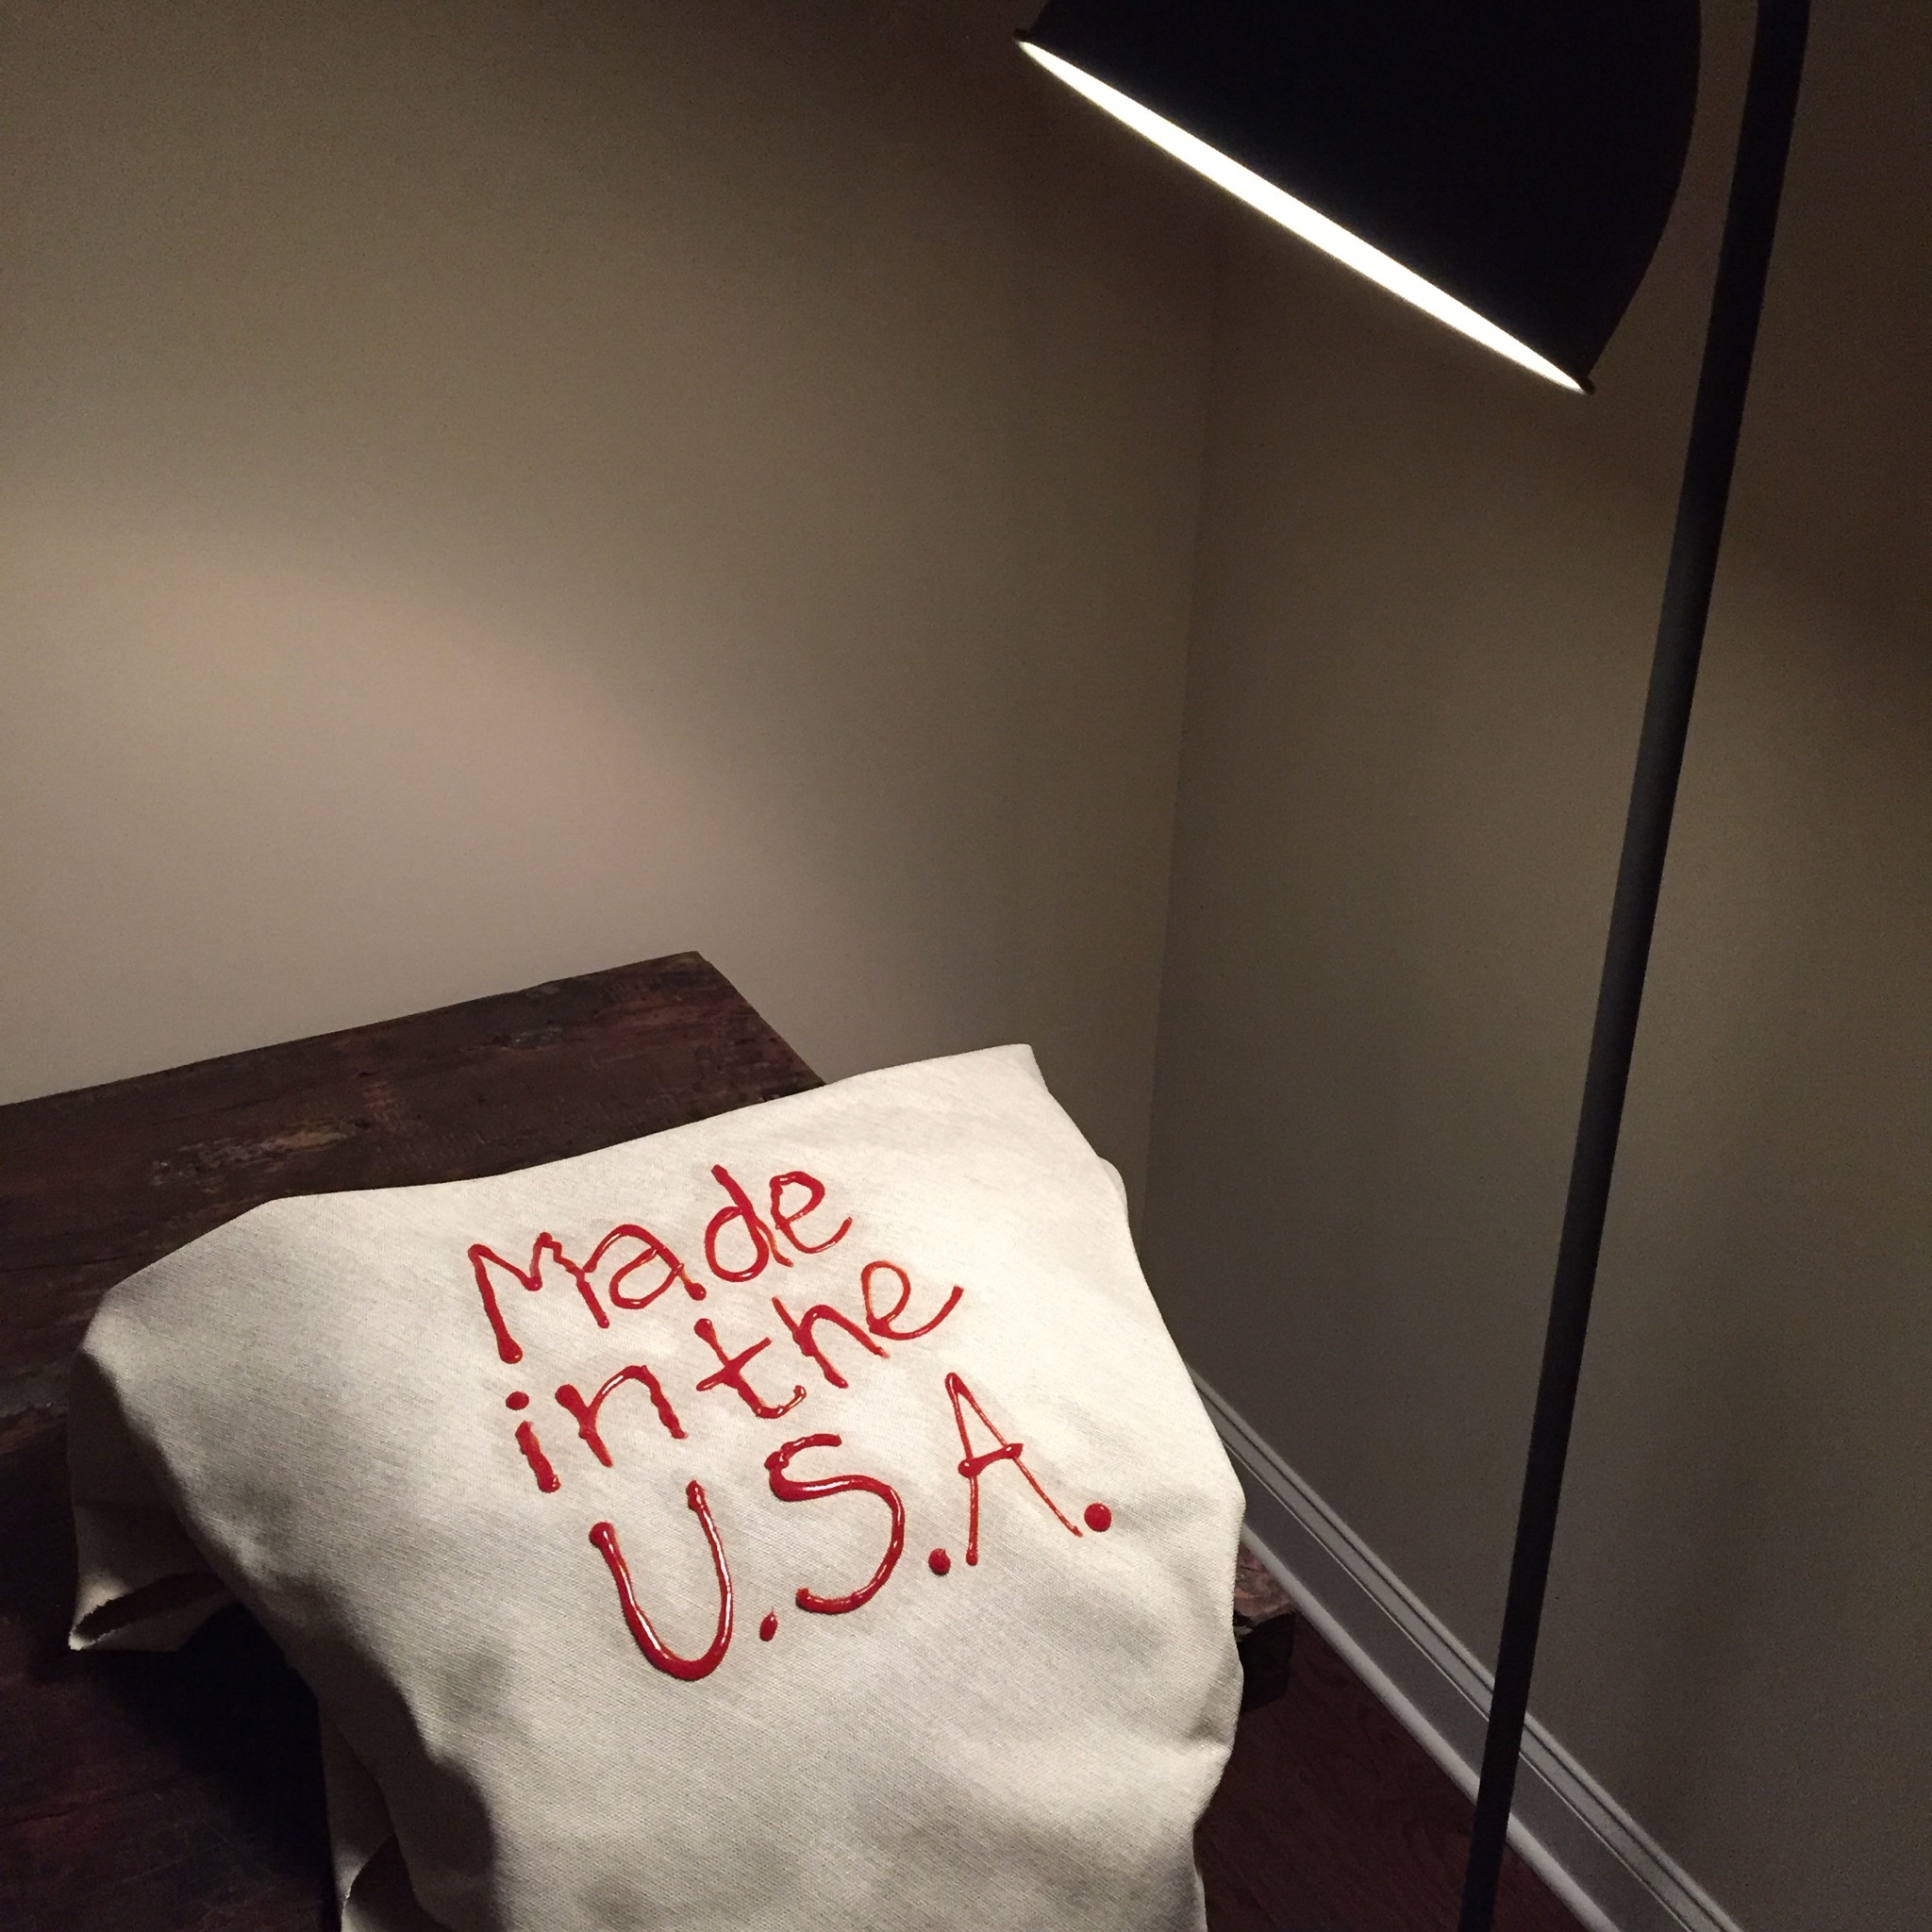 Fabric made in the USA